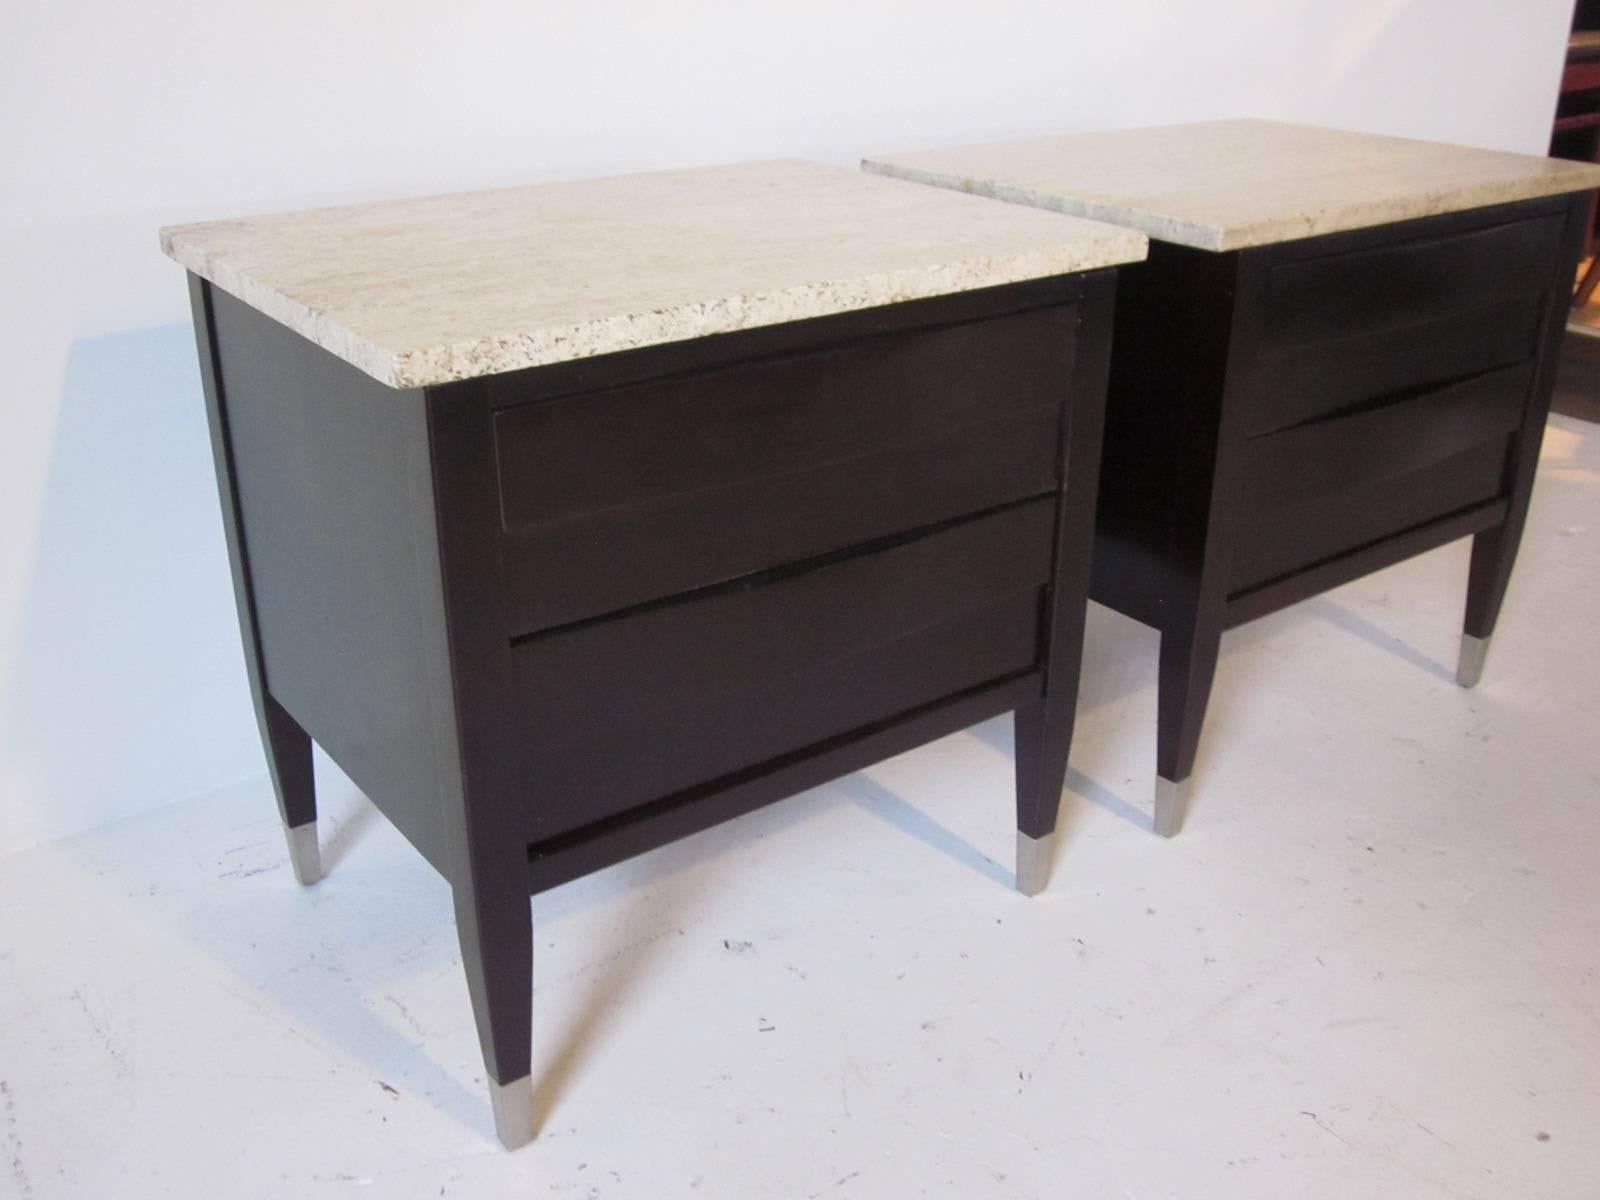 A pair of nightstands in a dark ebony finish with travertine marble tops and two lower drawers, stainless metal foot caps complement the piece manufactured by American of Martinsville.